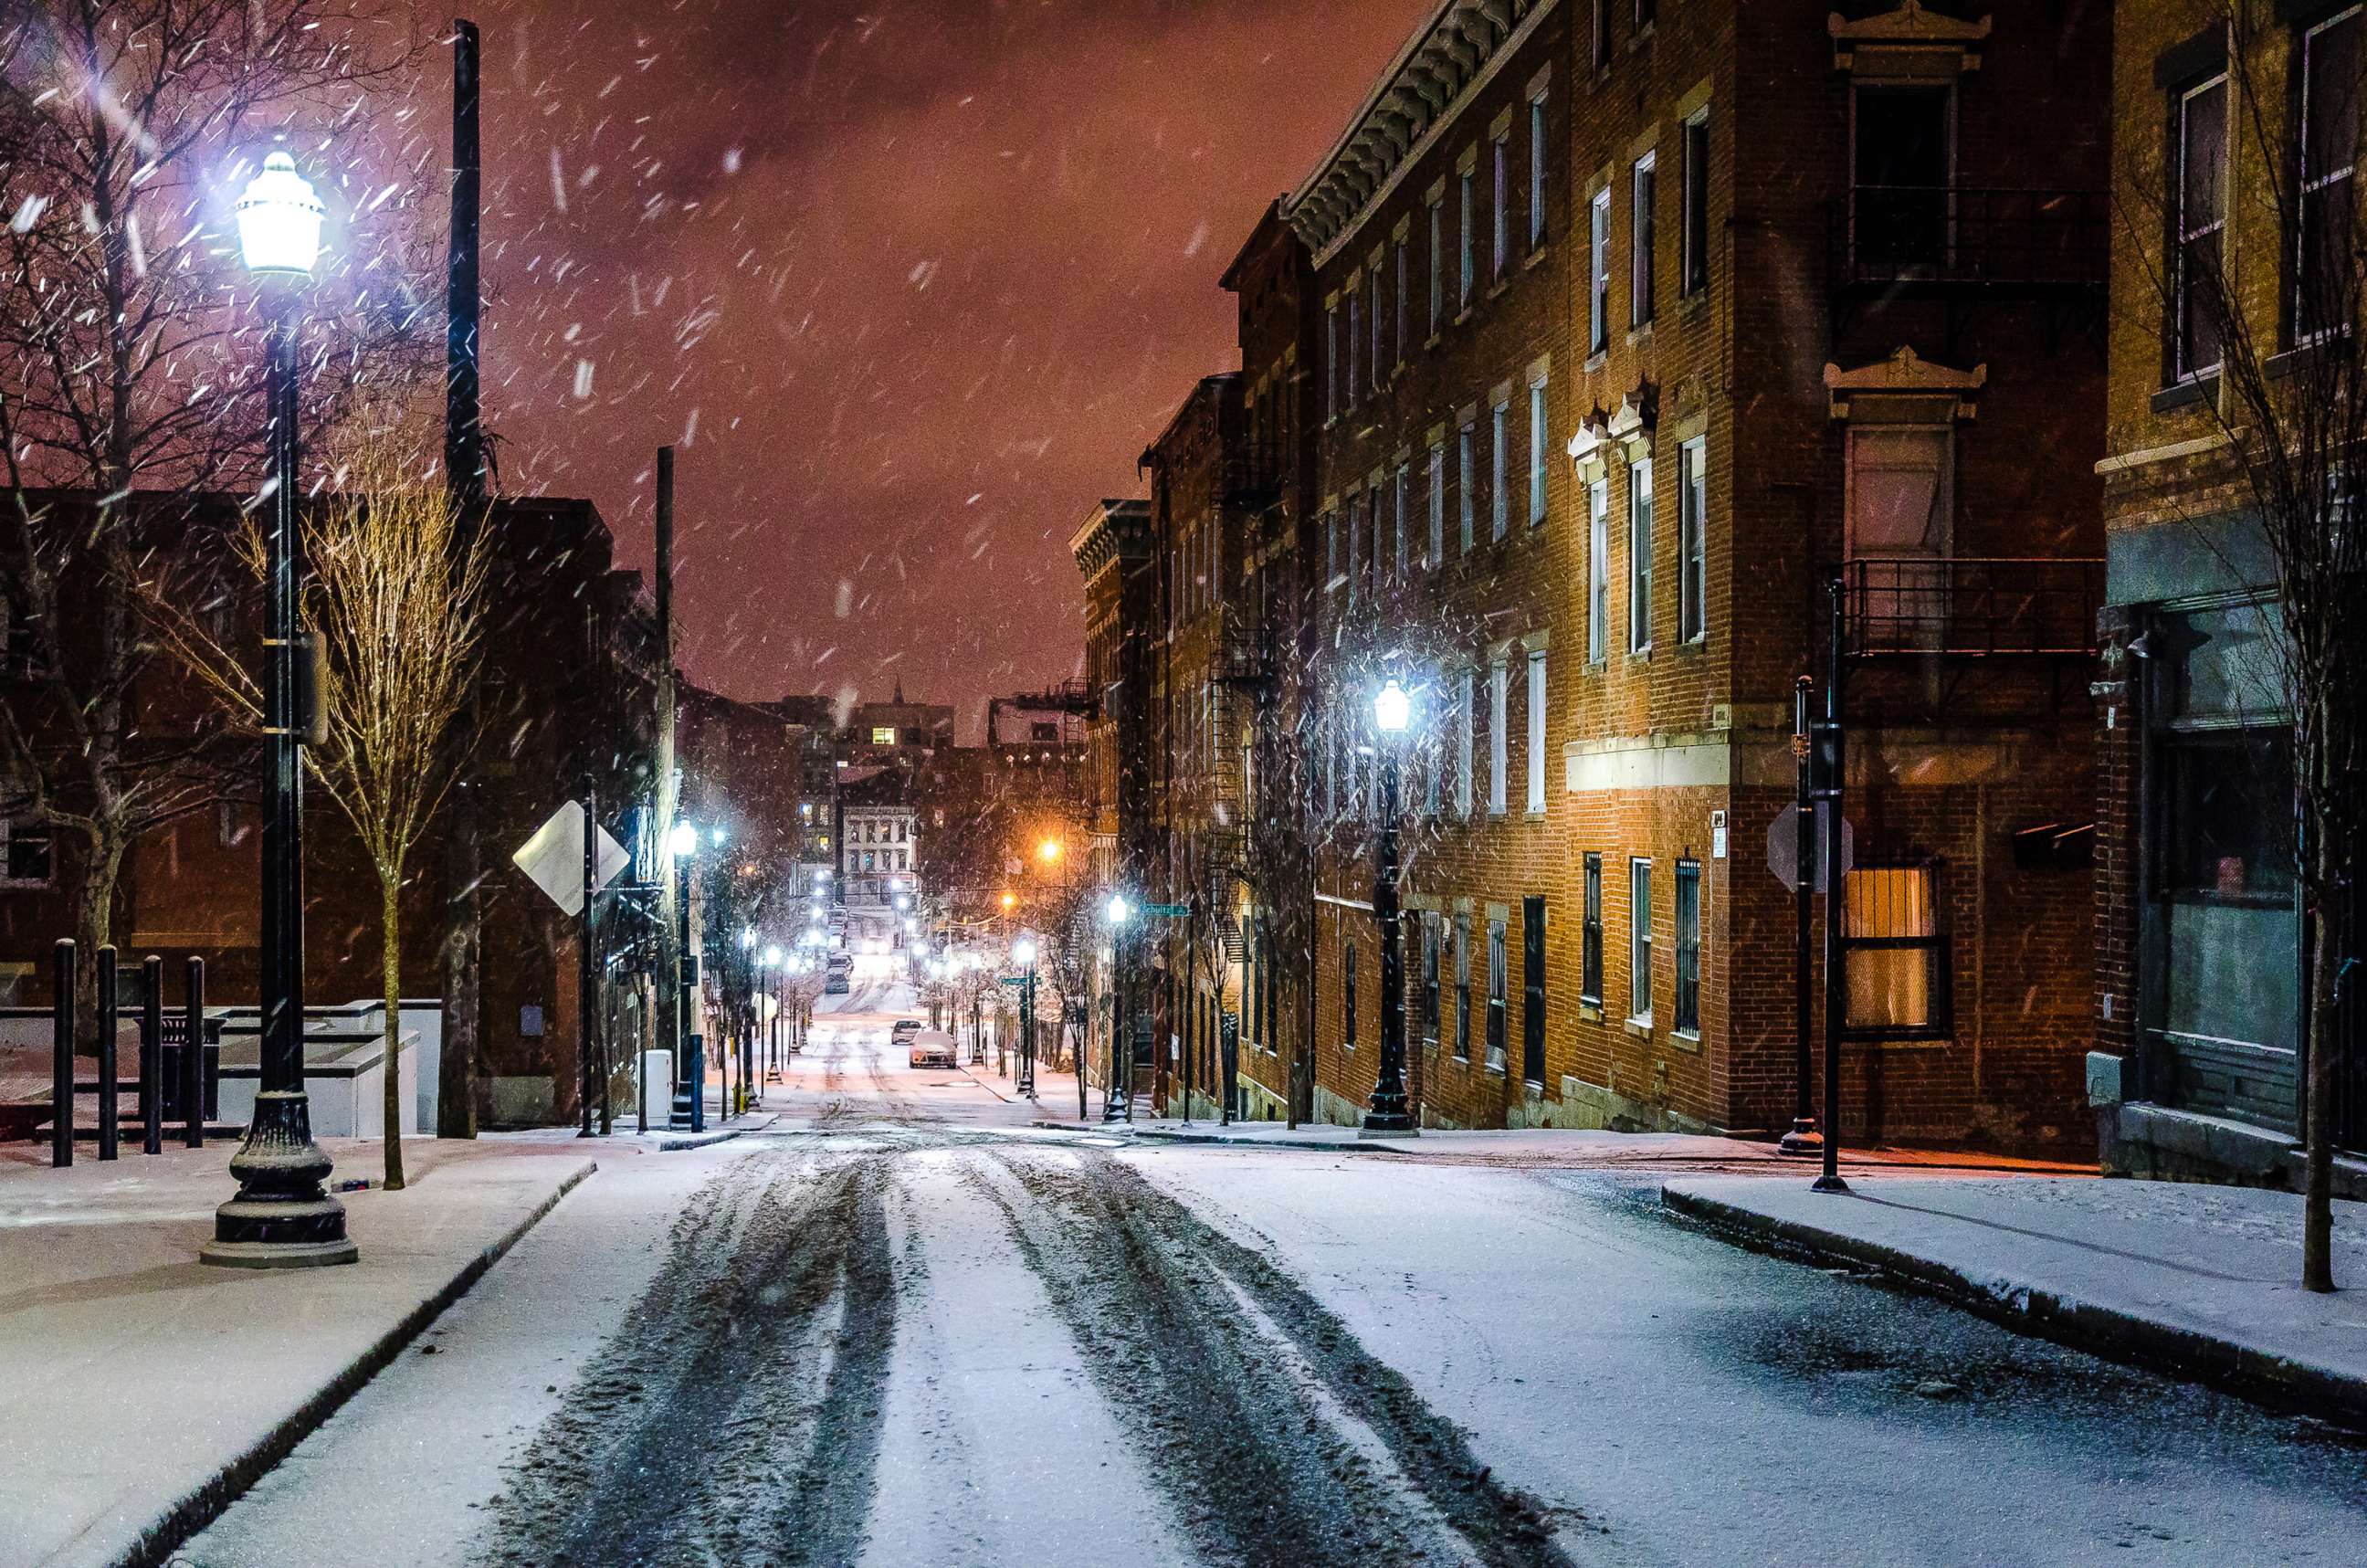 PHOTO: Snow falls in a historic district of Cincinnati in an undated stock photo.